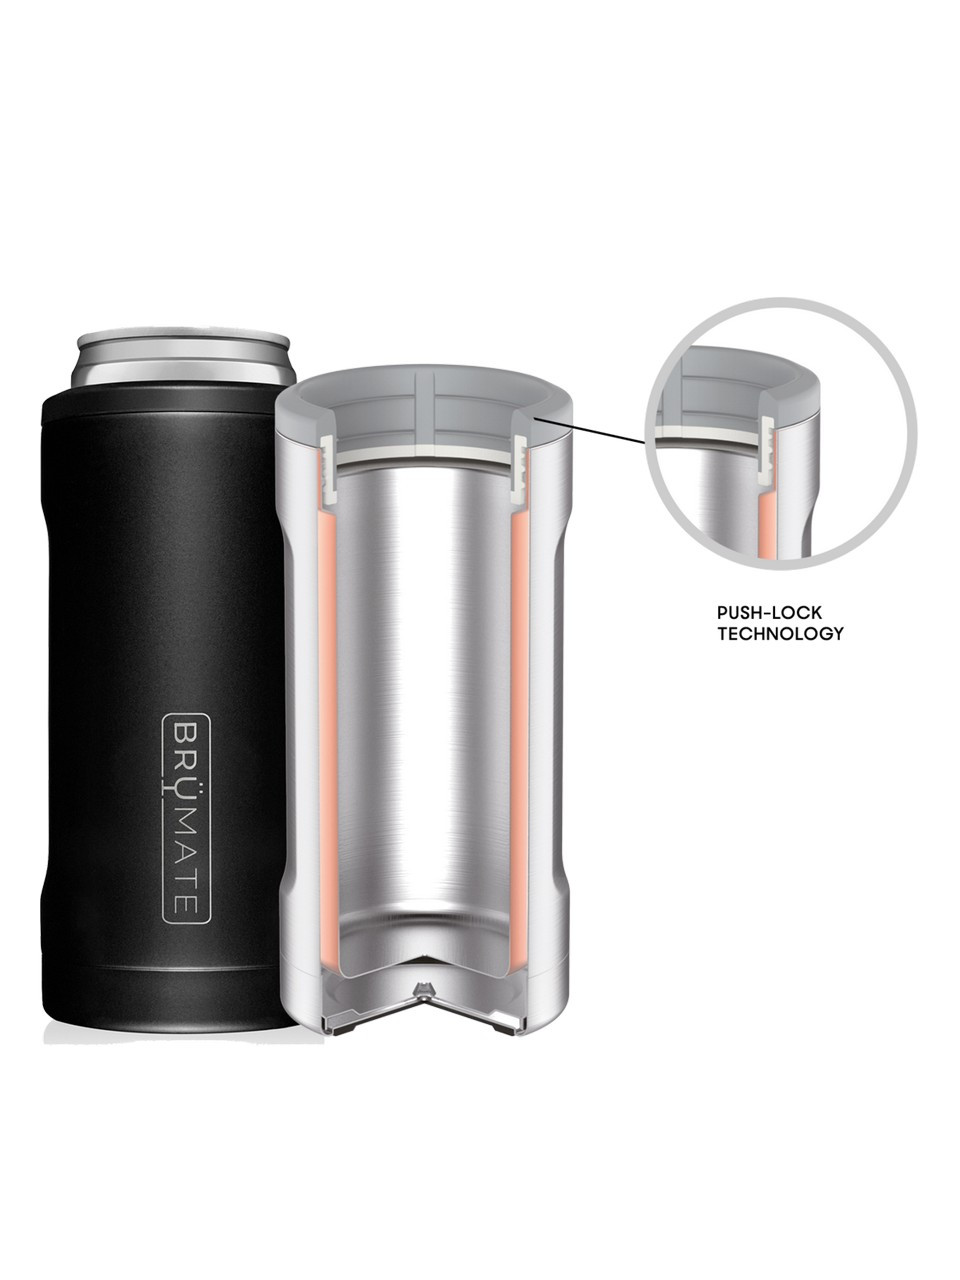 BrüMate Hopsulator Slim - Stainless Steel Triple Insulated Can Cooler